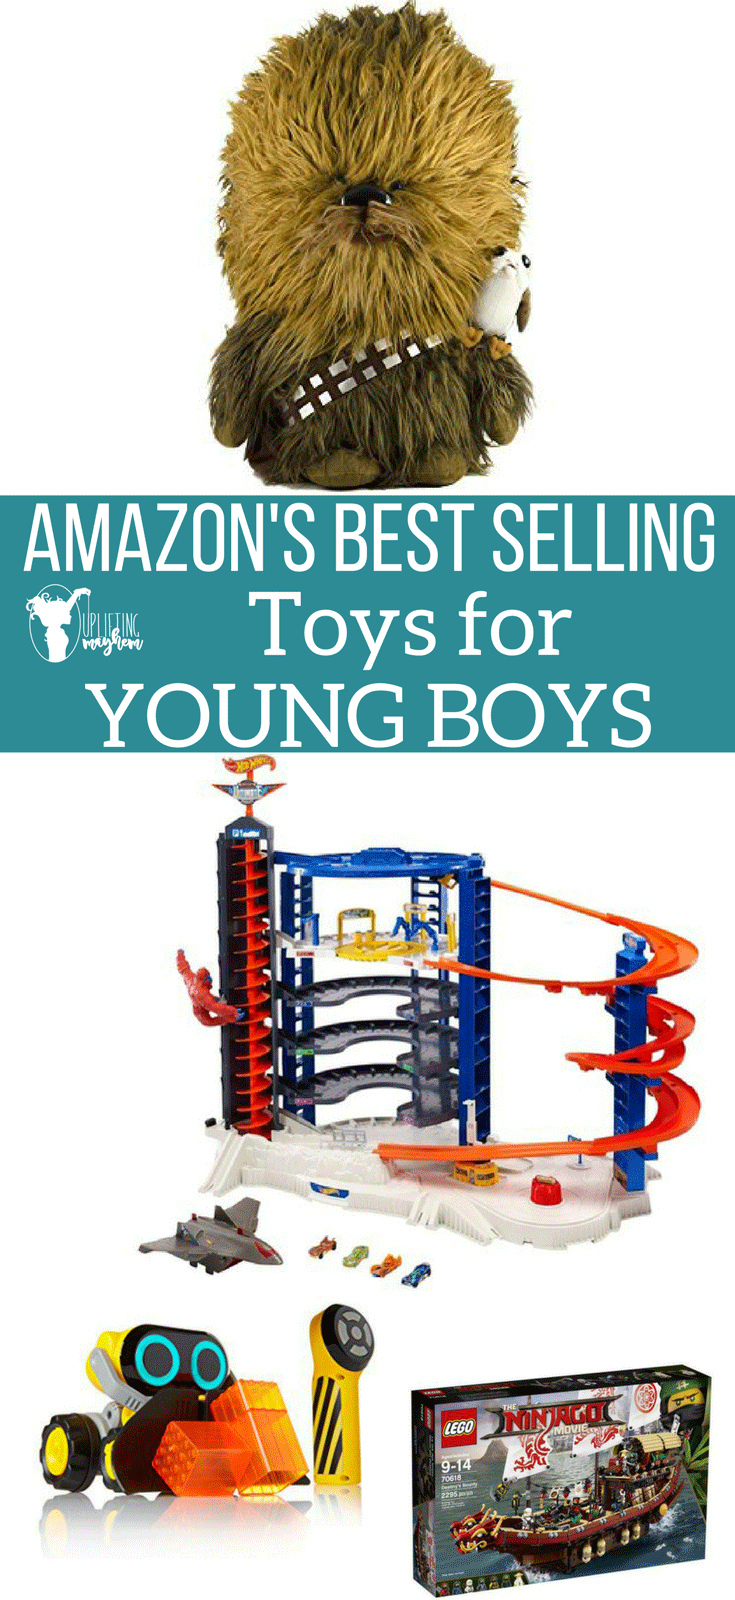 Amazon's Best Selling Toys for Young Boys